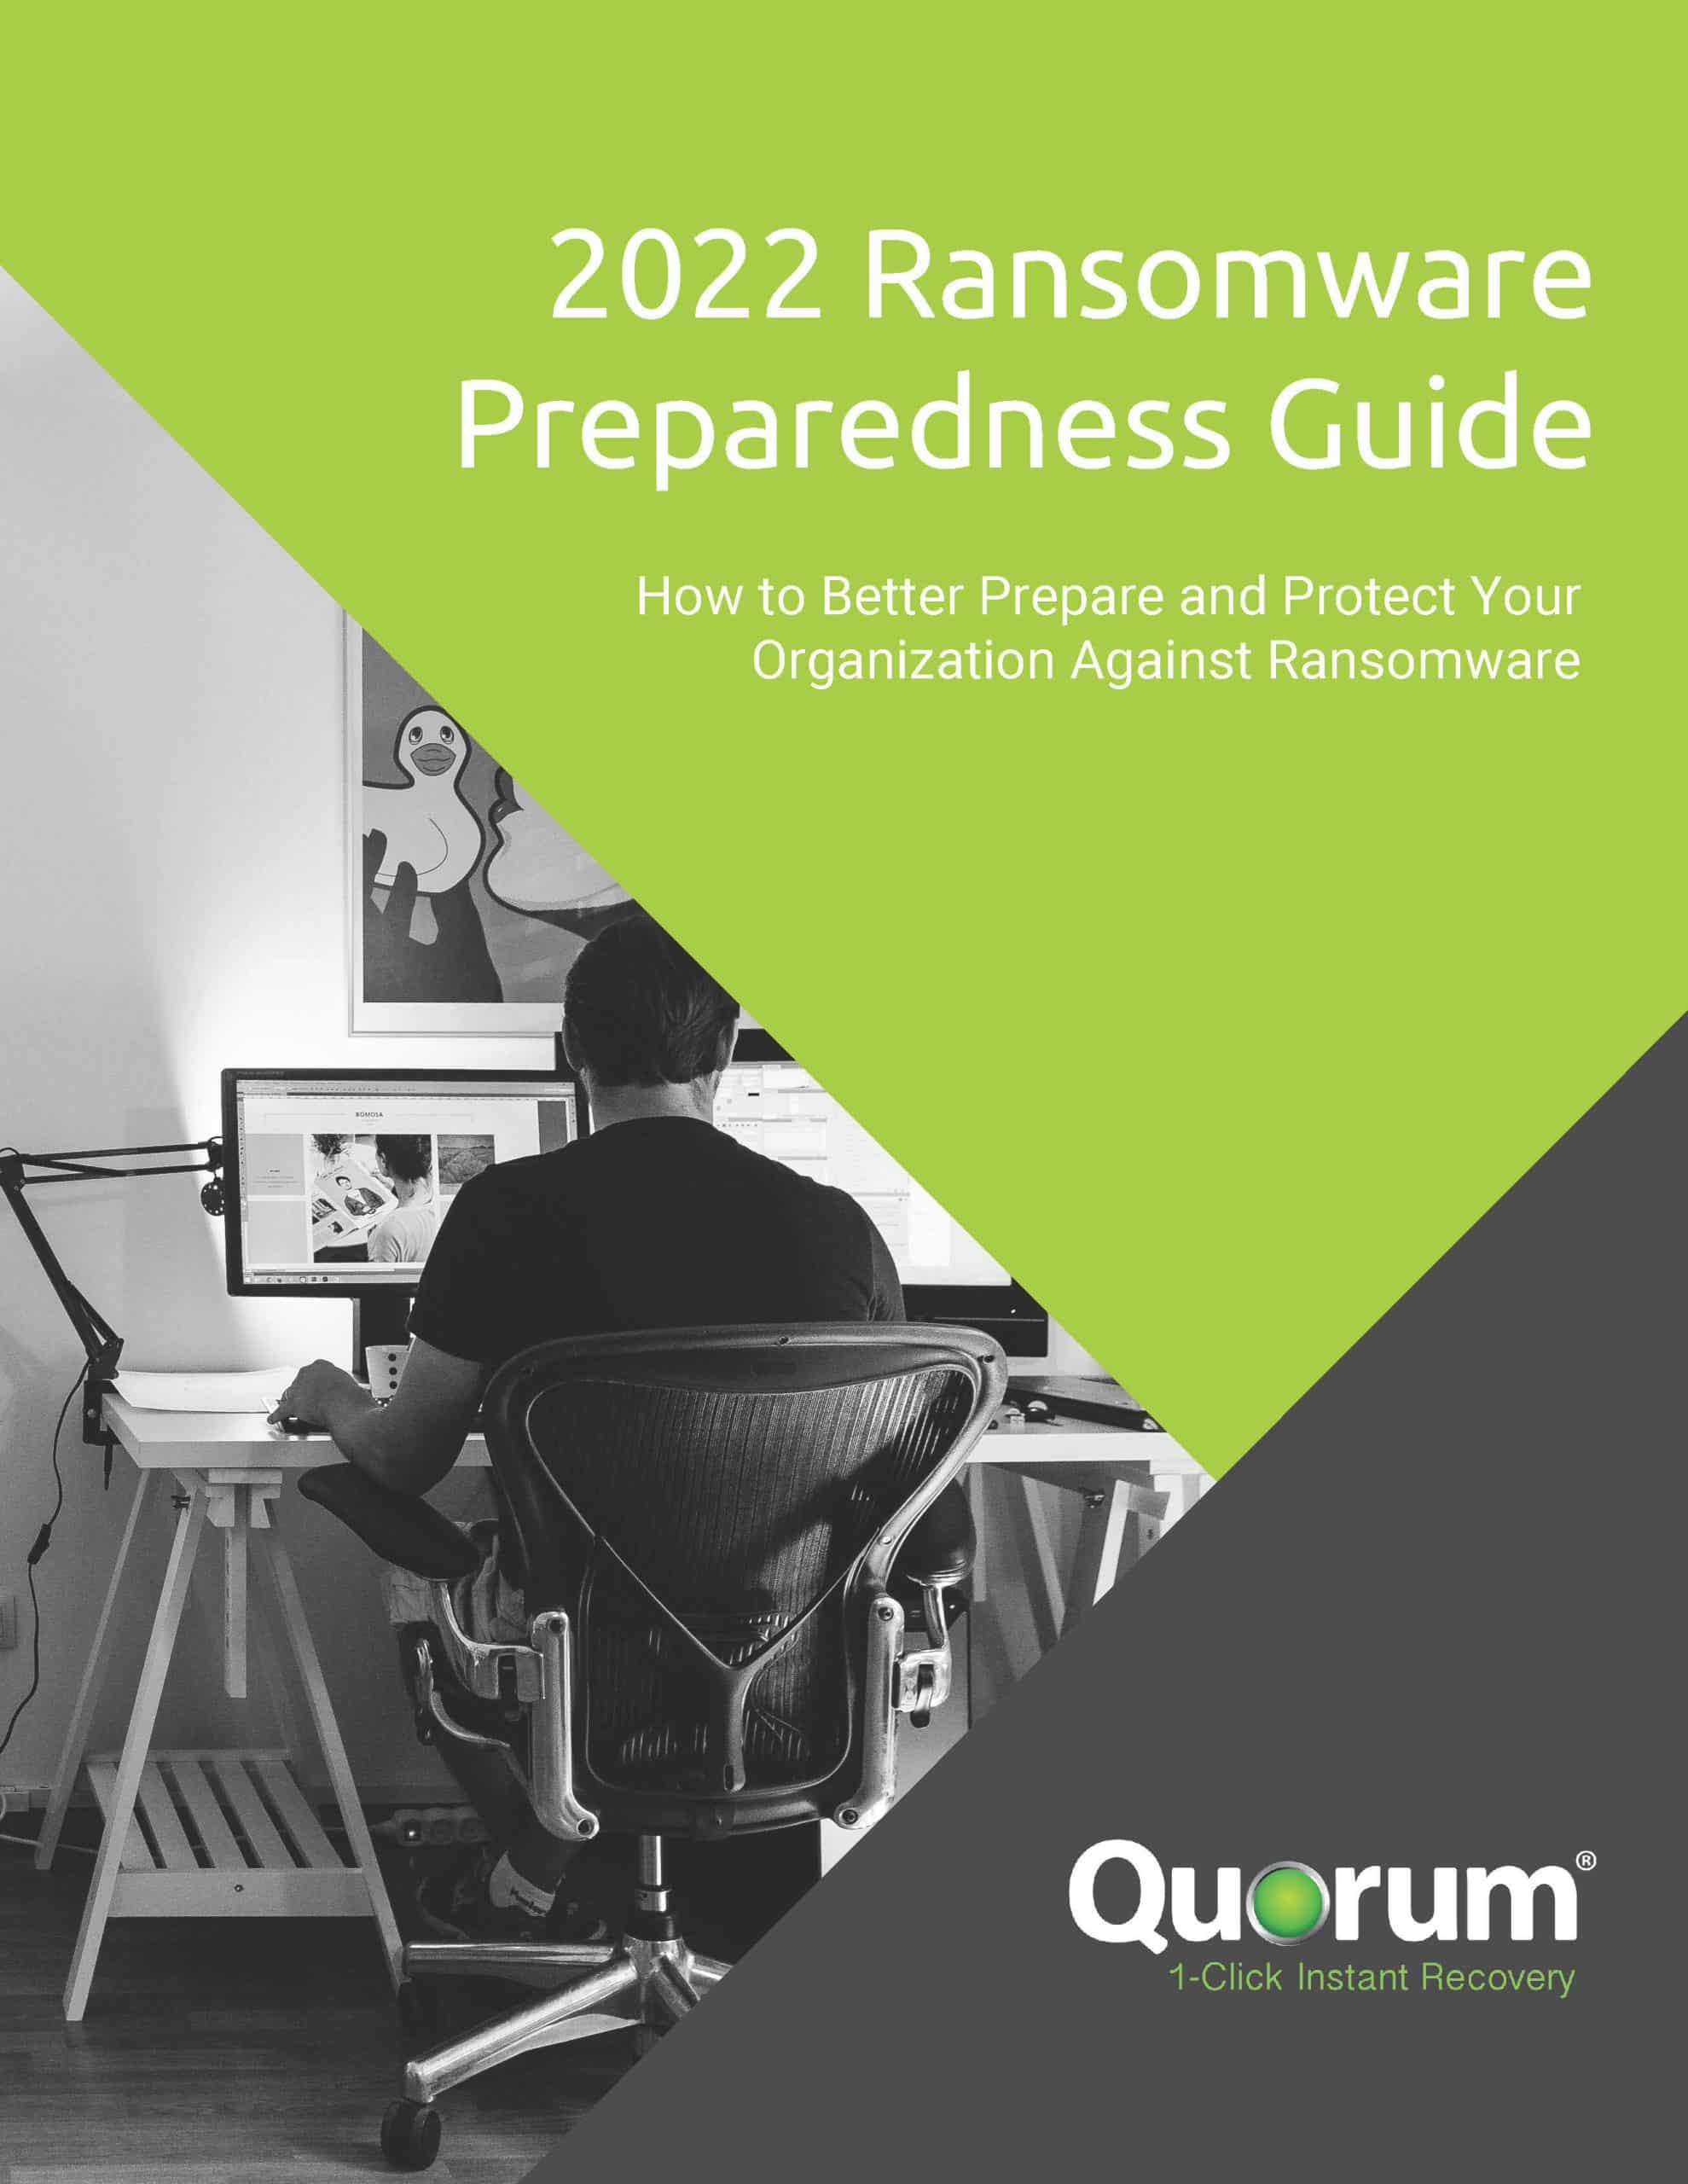 A person sits in a modern office chair working on a computer with multiple monitors. The text on the image reads, "2022 Ransomware Preparedness Guide: How to Better Prepare and Protect Your Organization Against Ransomware," with a logo for "Quorum 1-Click Instant Recovery" at the bottom.